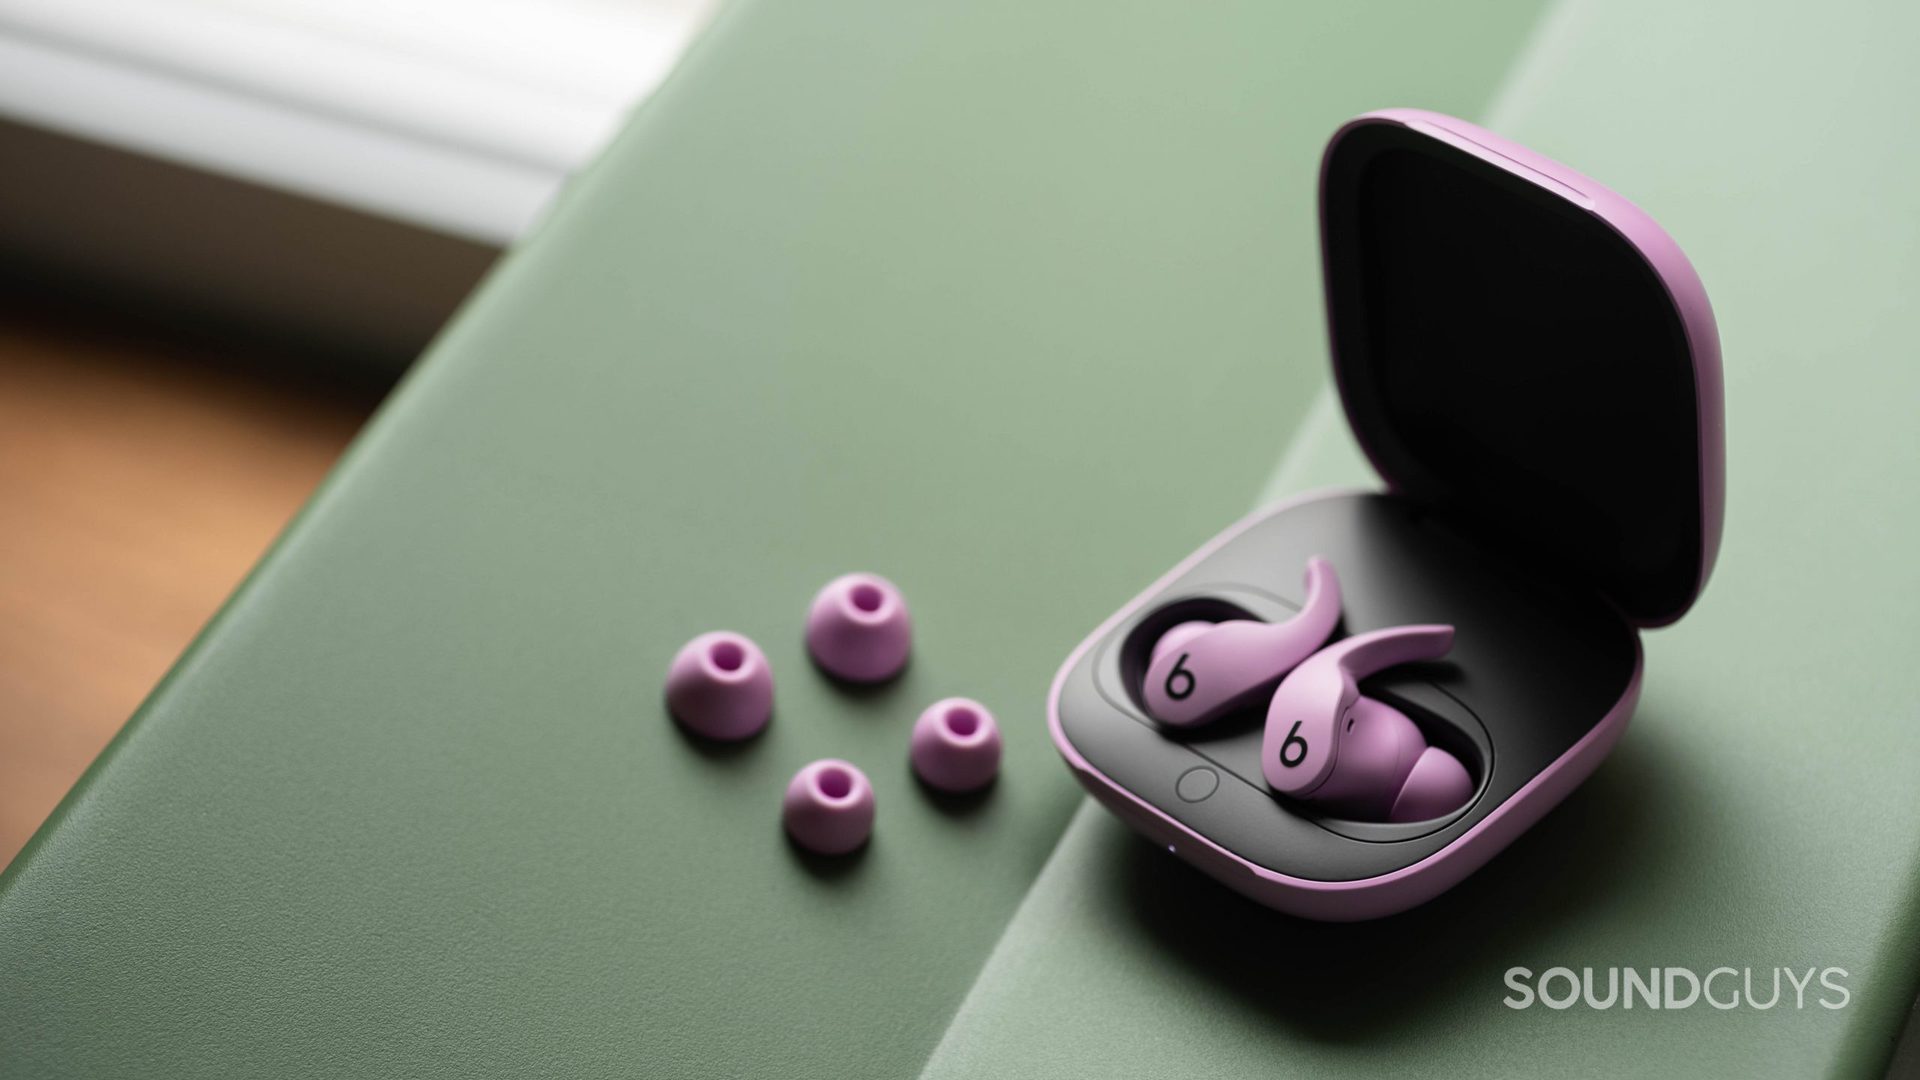 Beats Fit Pro noise canceling true wireless earbuds inside the case, showing different ear tip sizes.